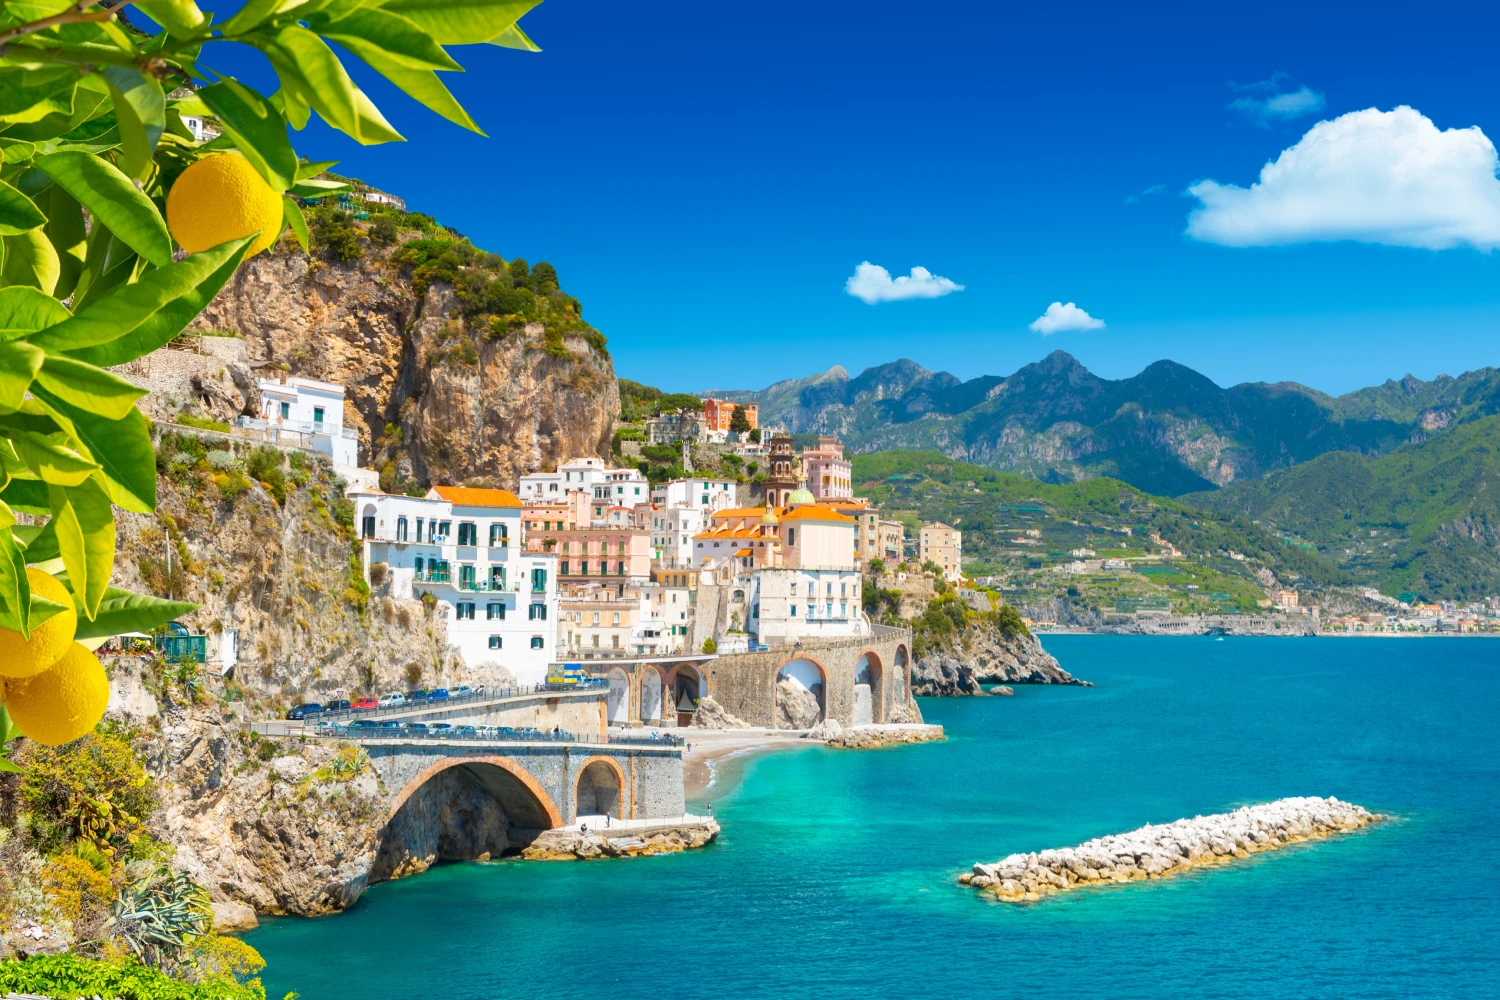 Beautiful View Of Amalfi On The Mediterranean Coast With Lemons In The Foreground